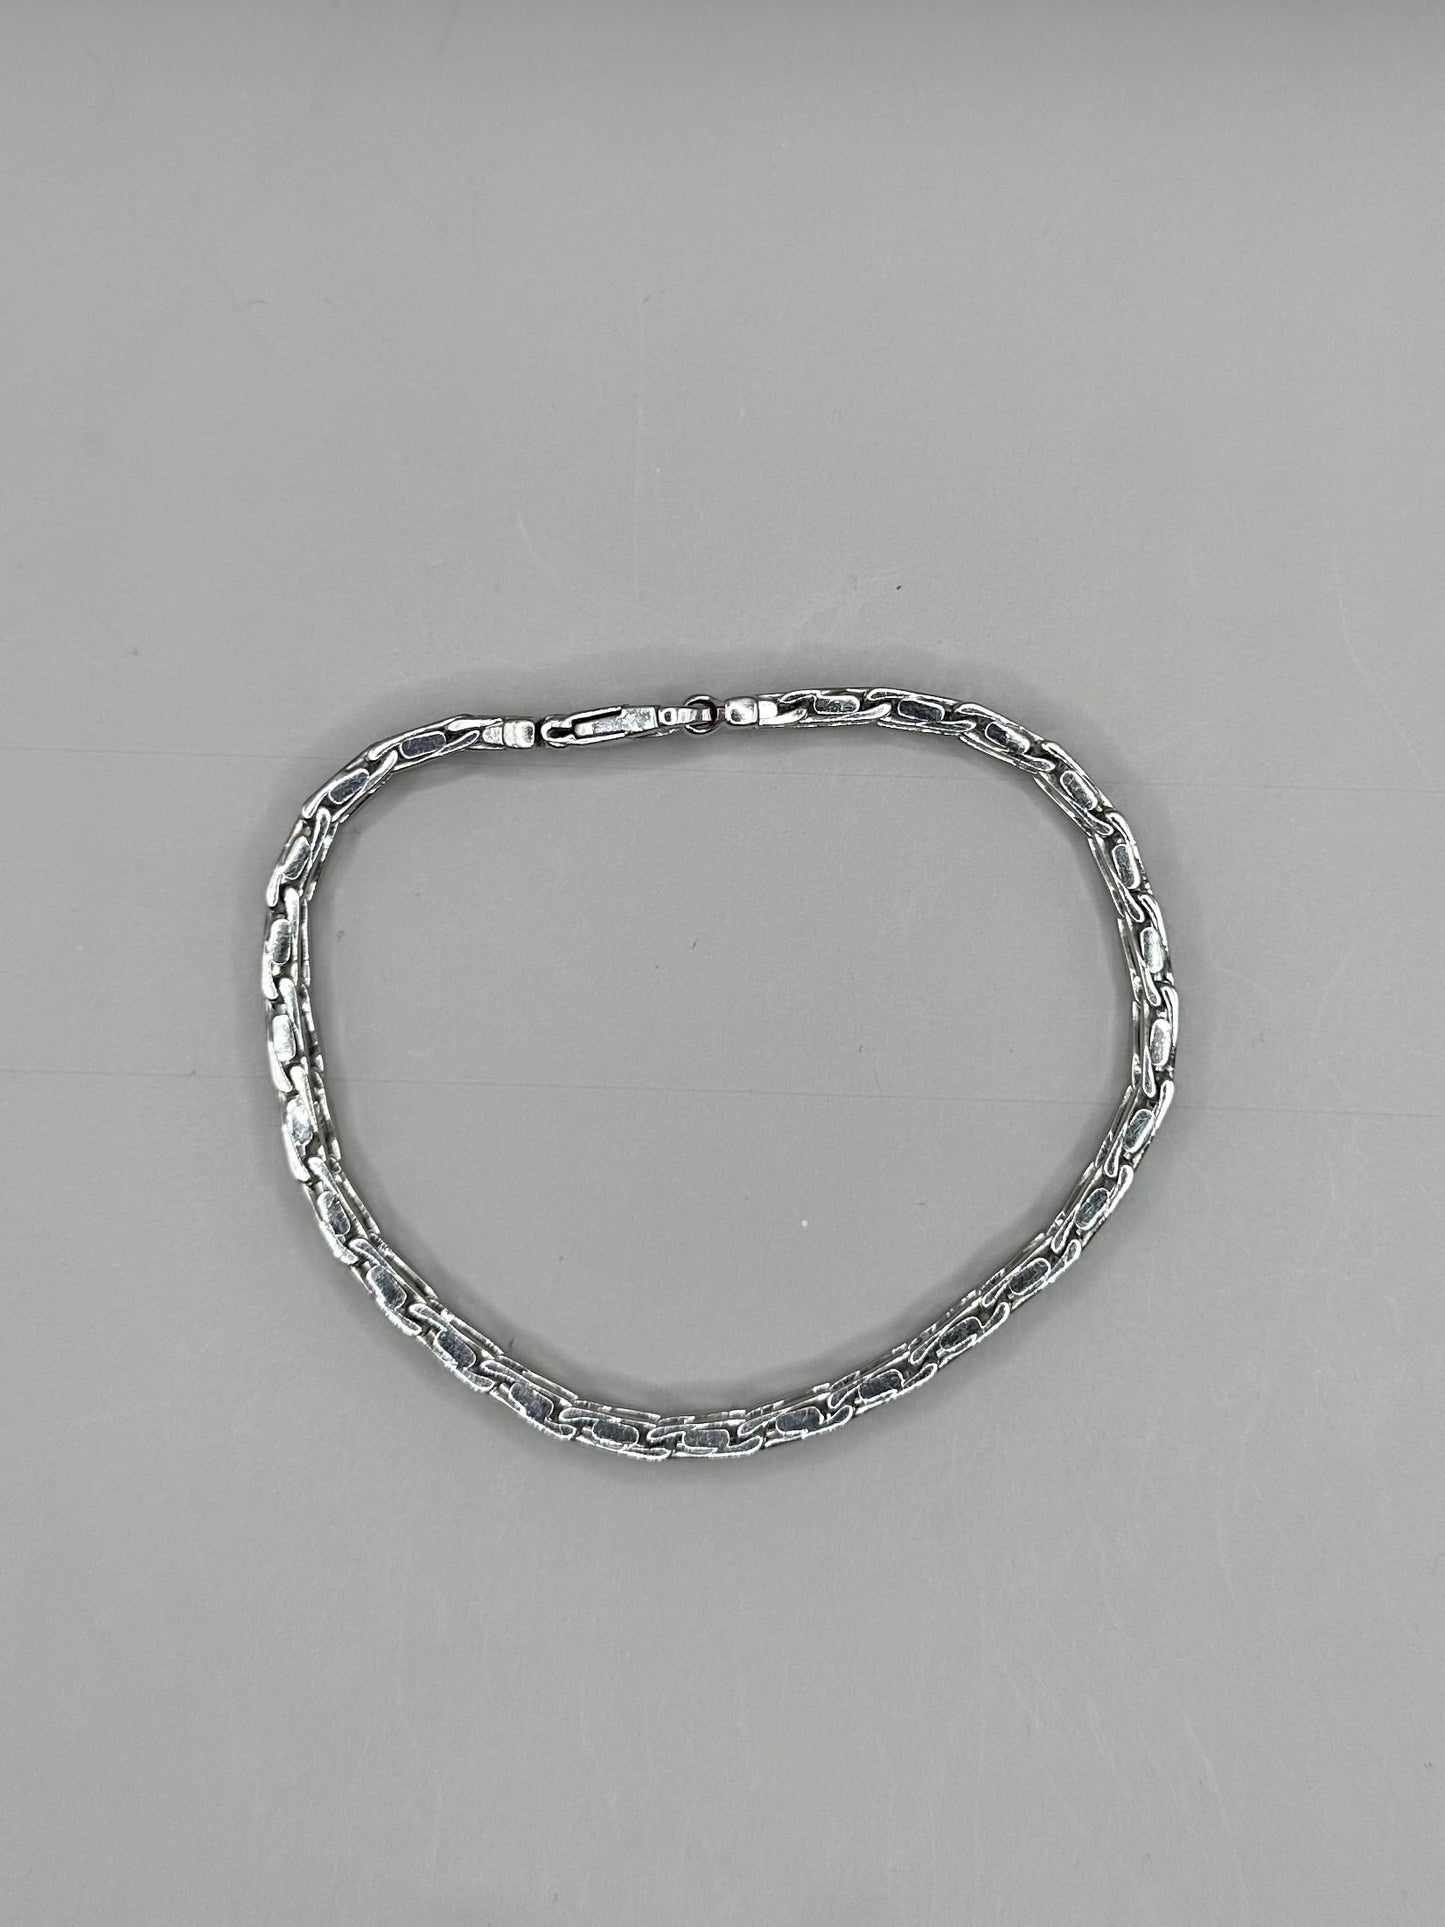 Bicycle Chain White Gold Bracelet